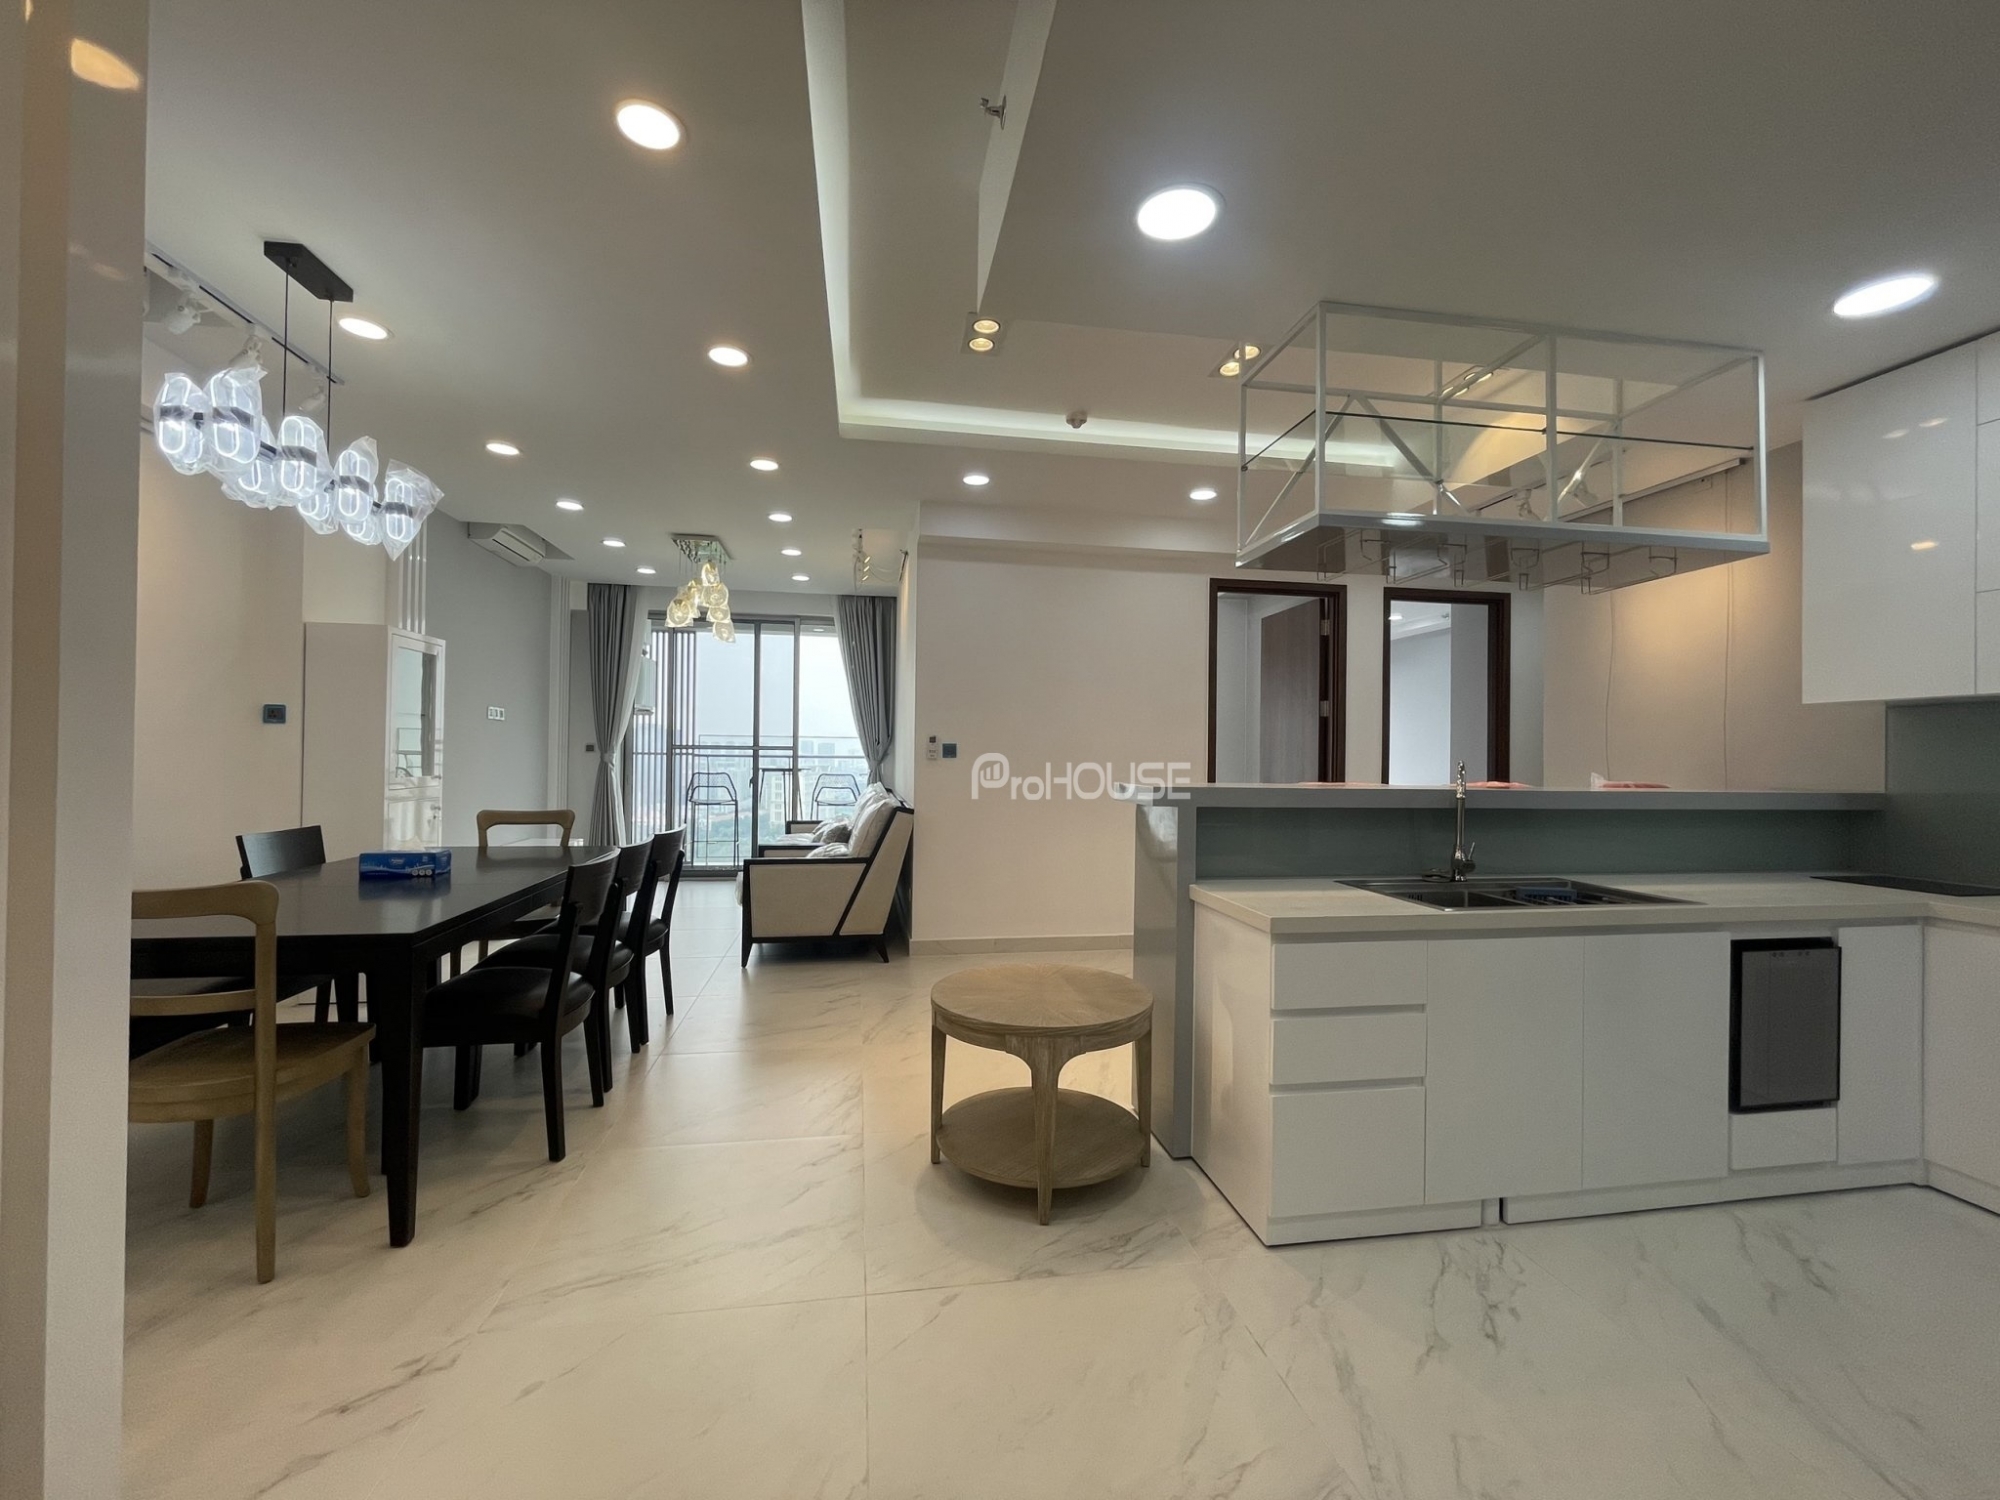 3-bedroom luxury apartment for rent at The Signature - Midtown with unobstructed view